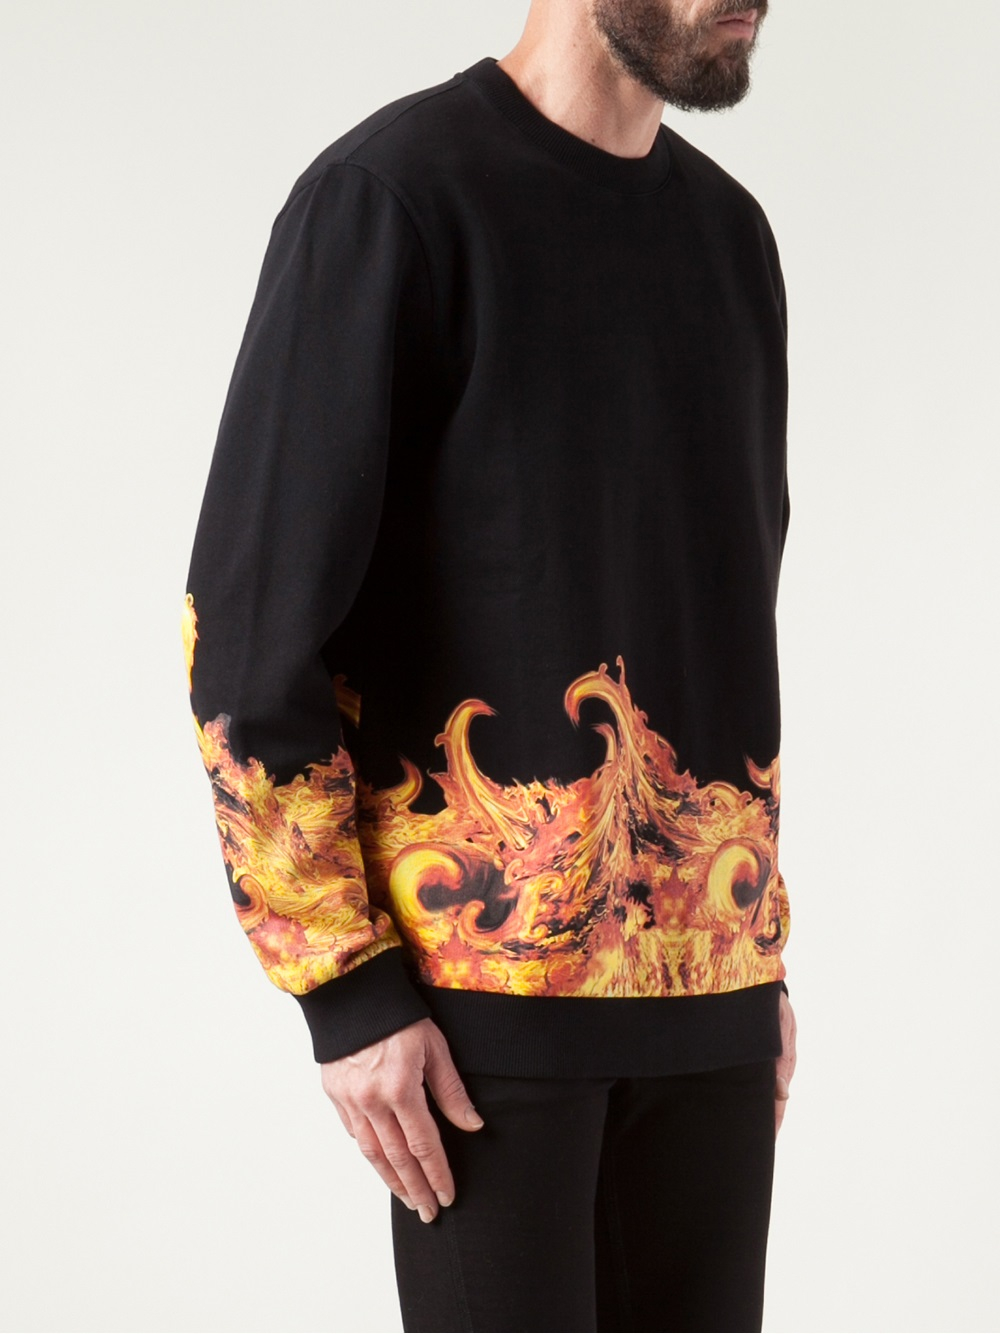 Givenchy Flame Graphic Sweatshirt in Black for Men - Lyst